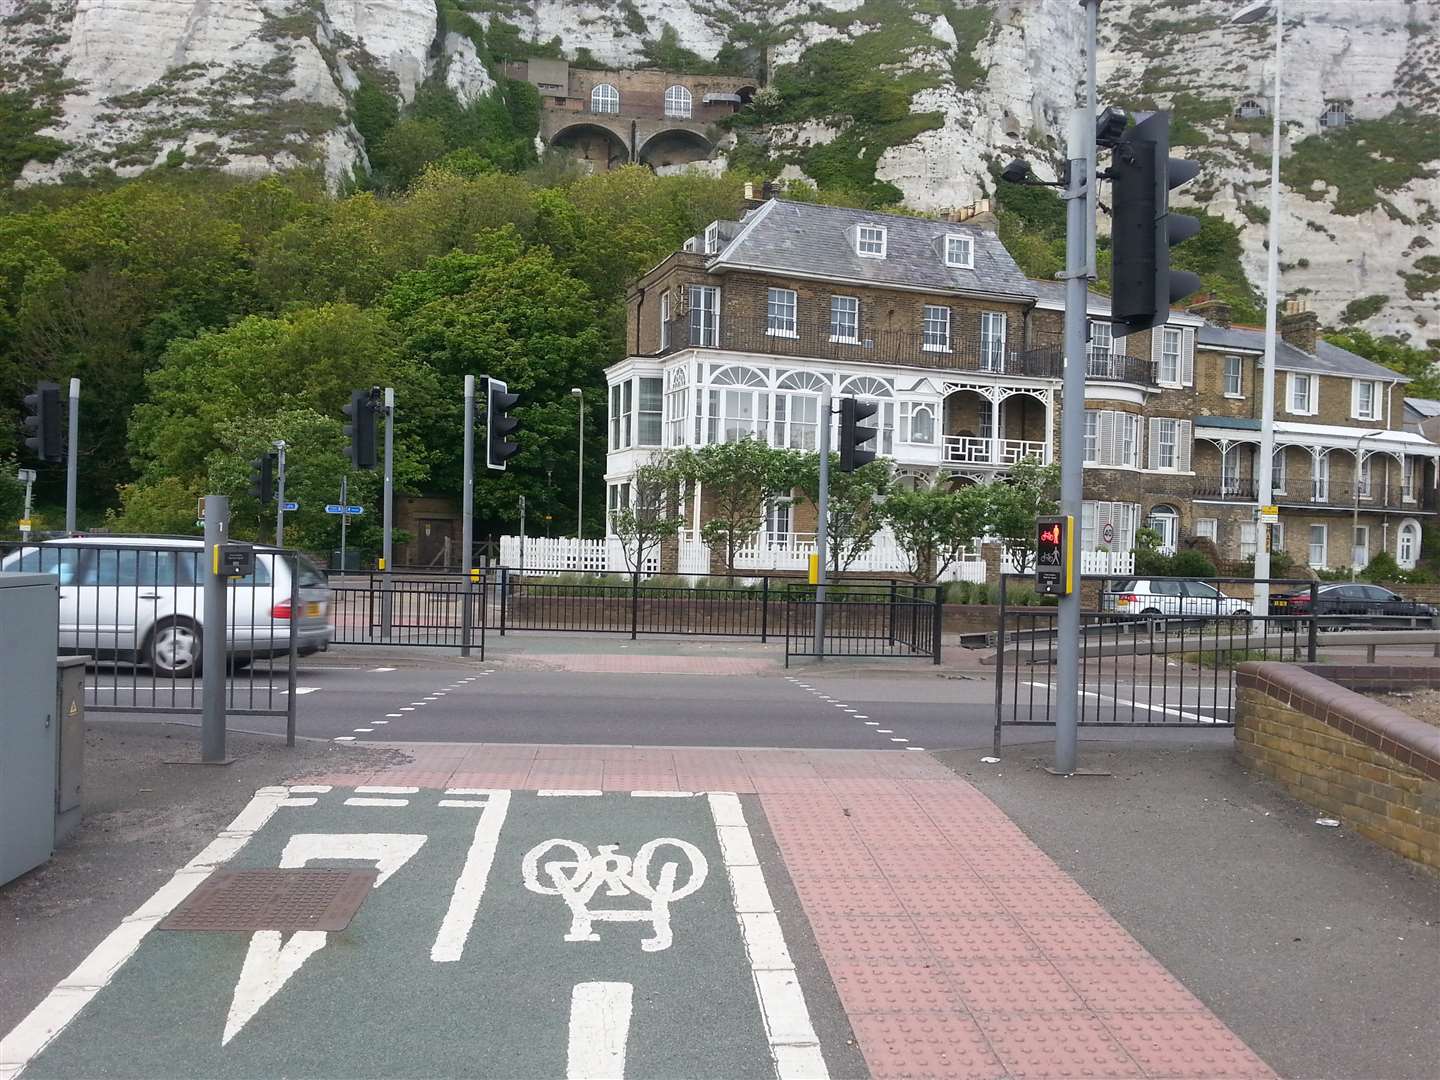 Elevated flower beds on the approach to the crossing in Townwall Street, Dover, where Simon Howard was killed.